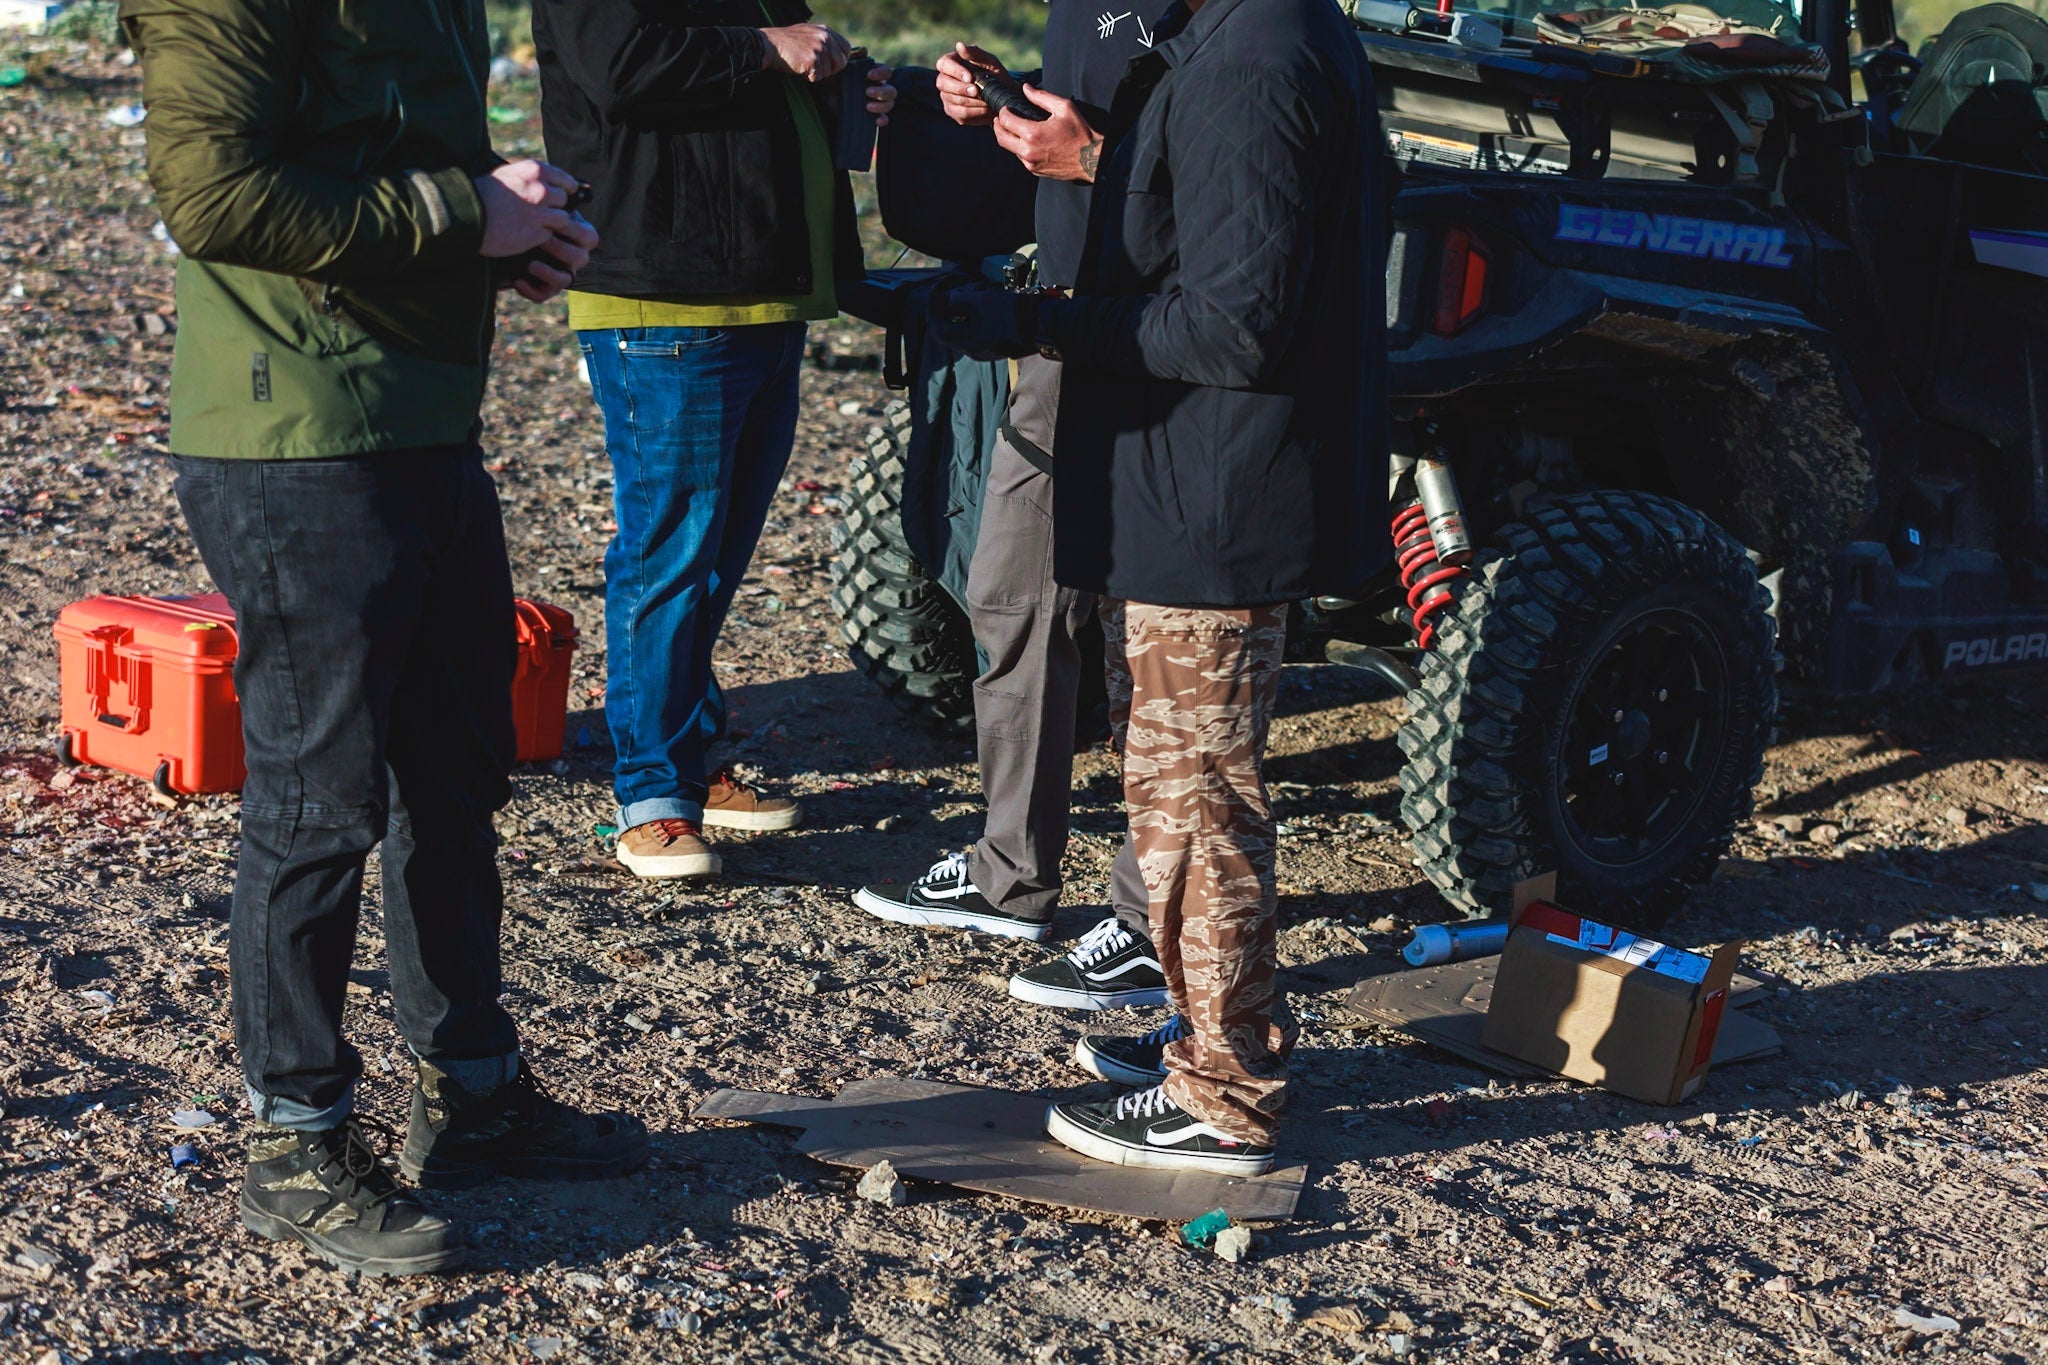 group of people wearing various pants, Vans, and Viktos boots